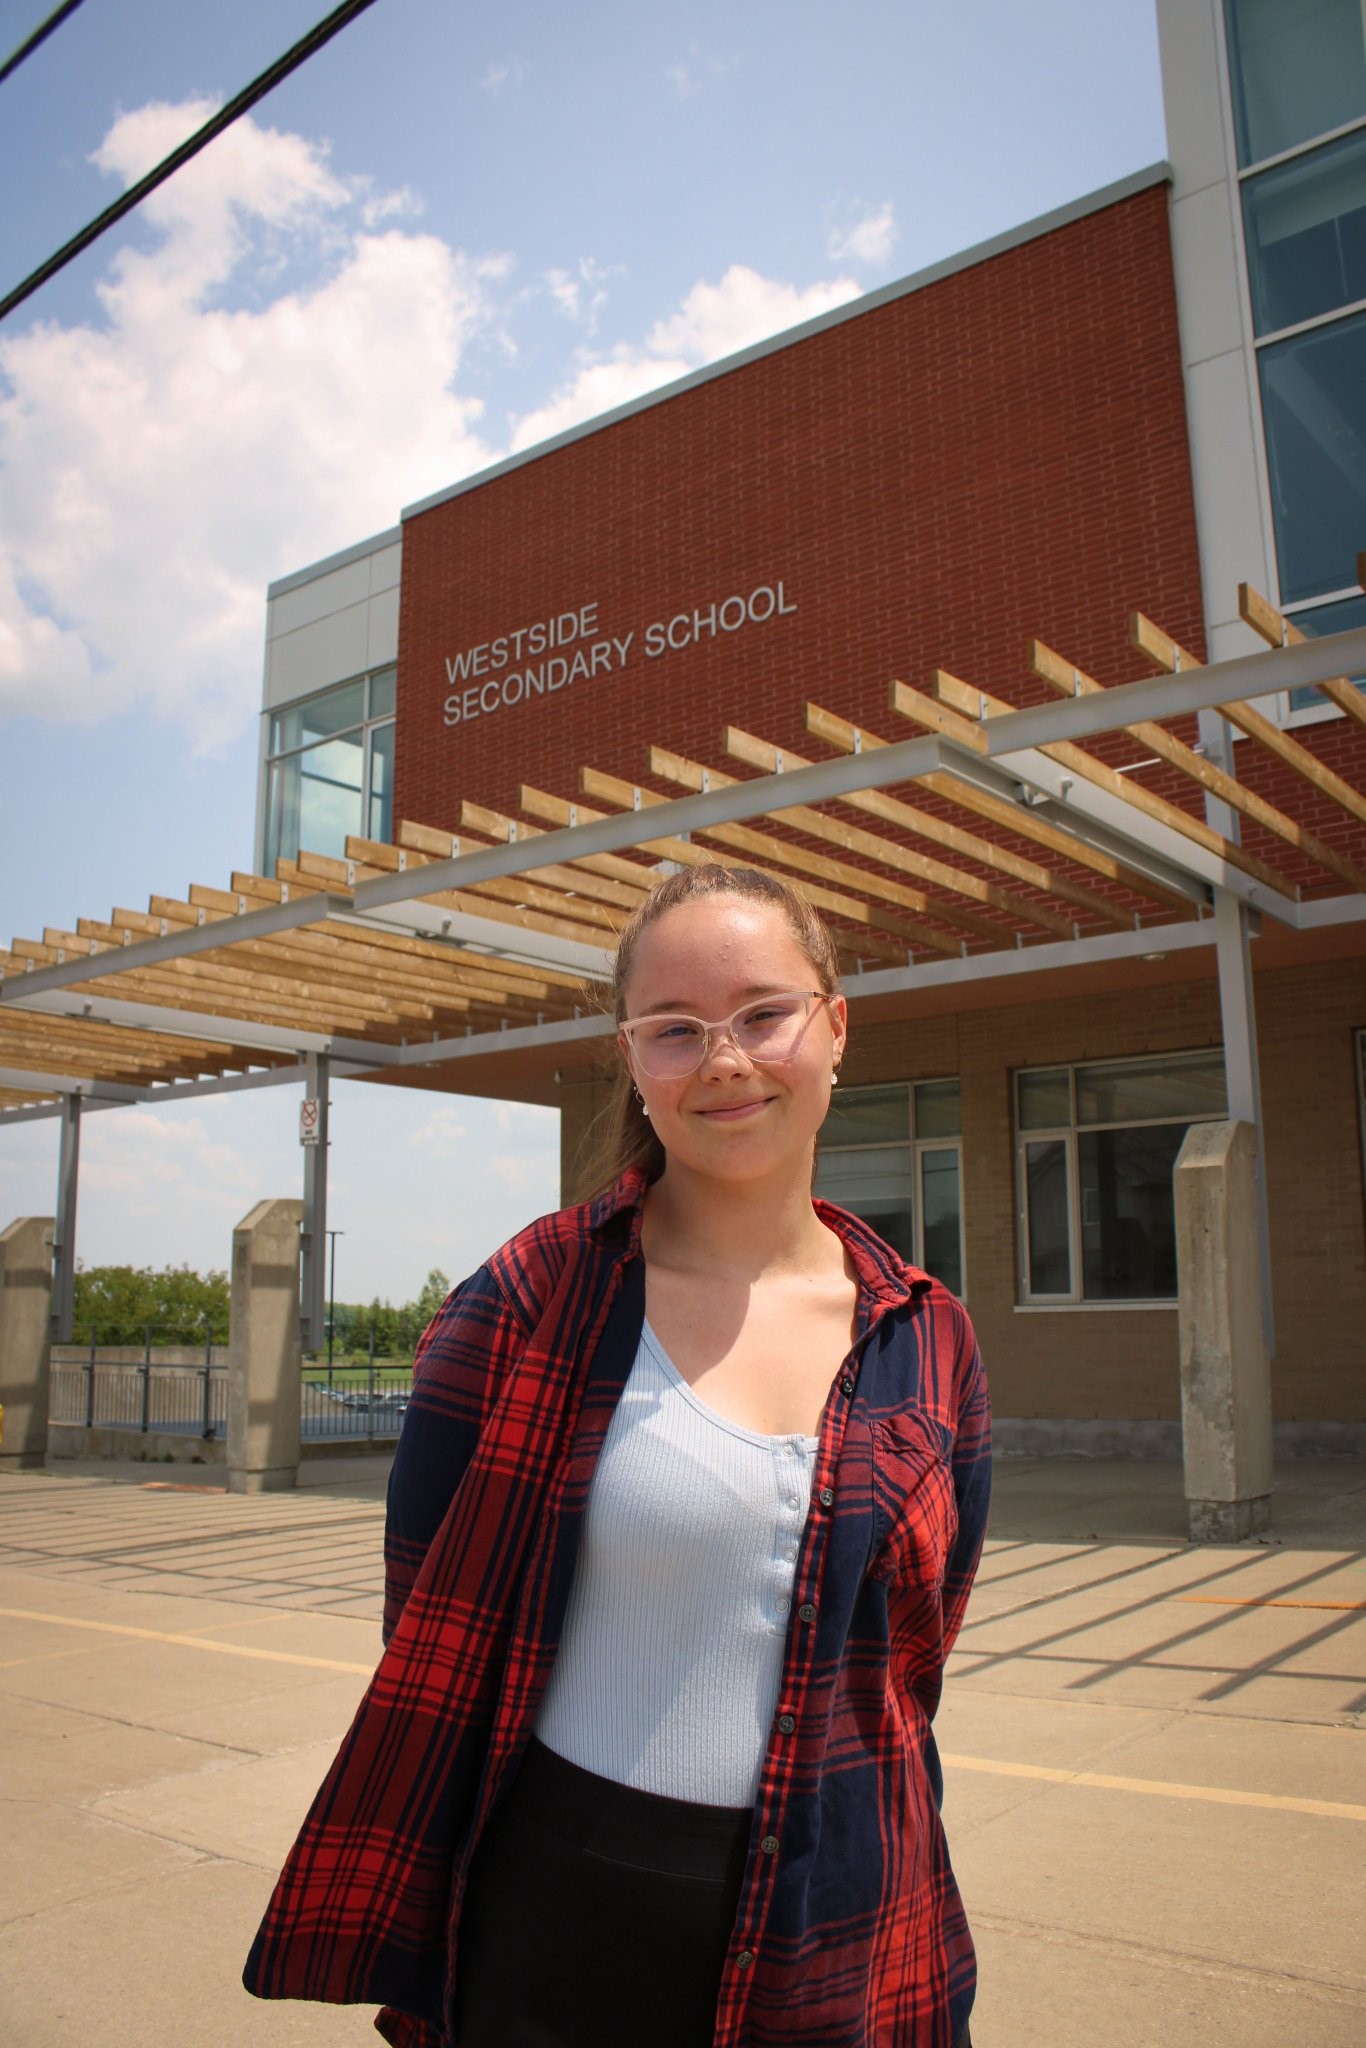 This photo features Madison L standing outside the front of Westside Secondary School.